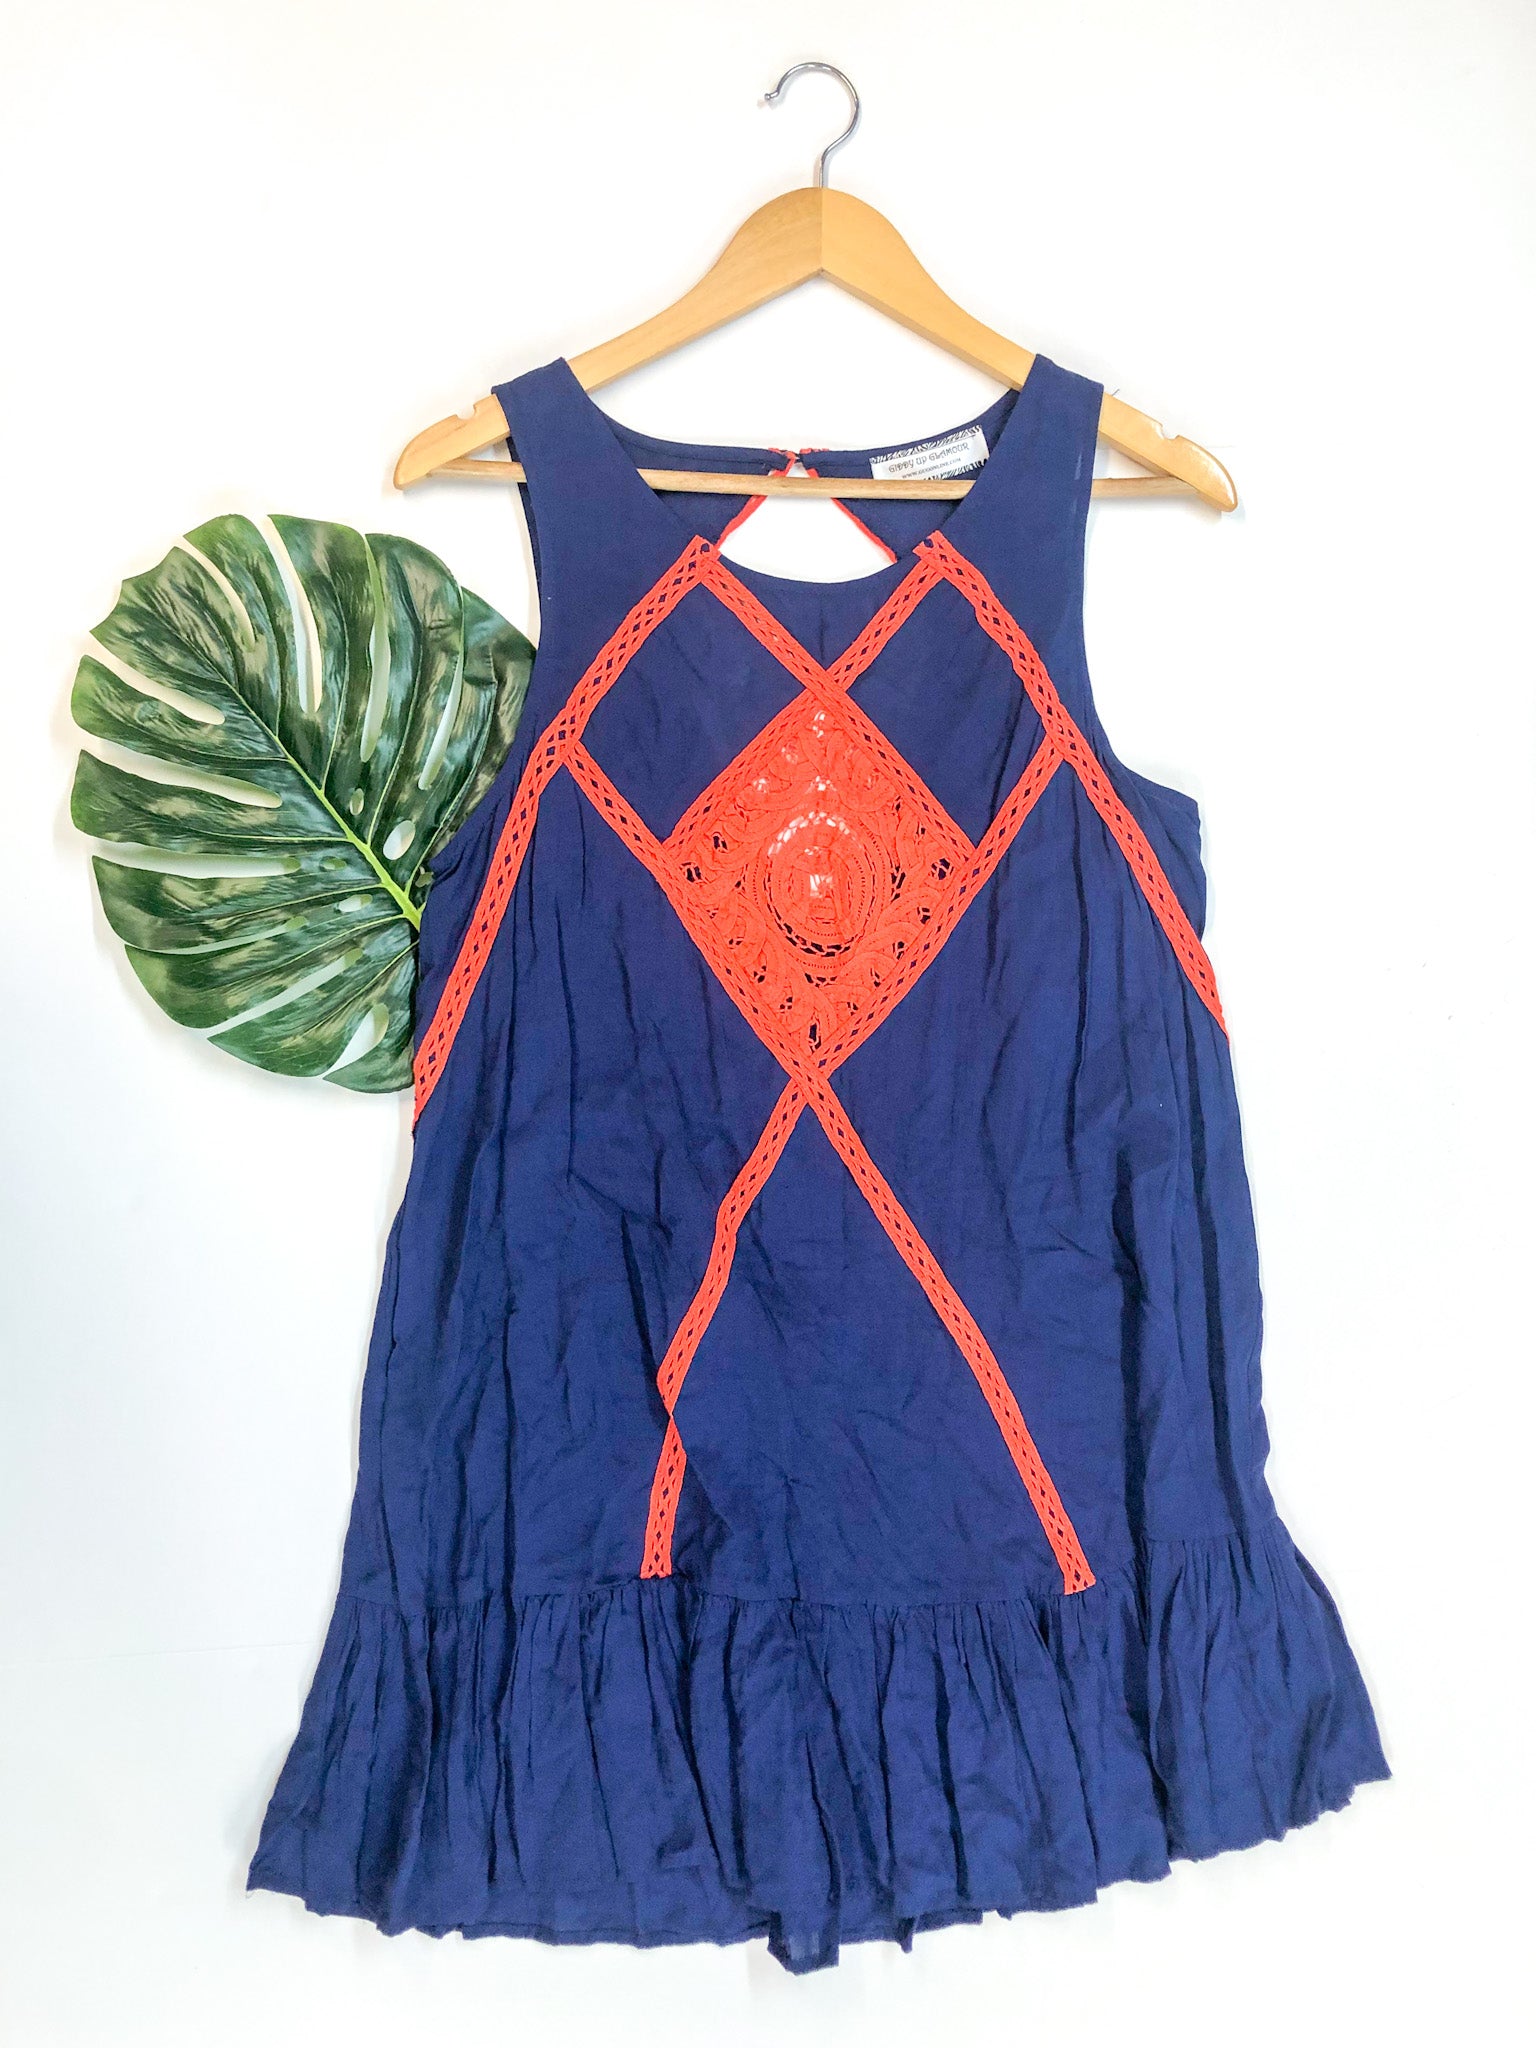 Last Chance Size Small | Ruffle Hem Tank Top Dress with Orange Crochet Detailing in Navy - Giddy Up Glamour Boutique